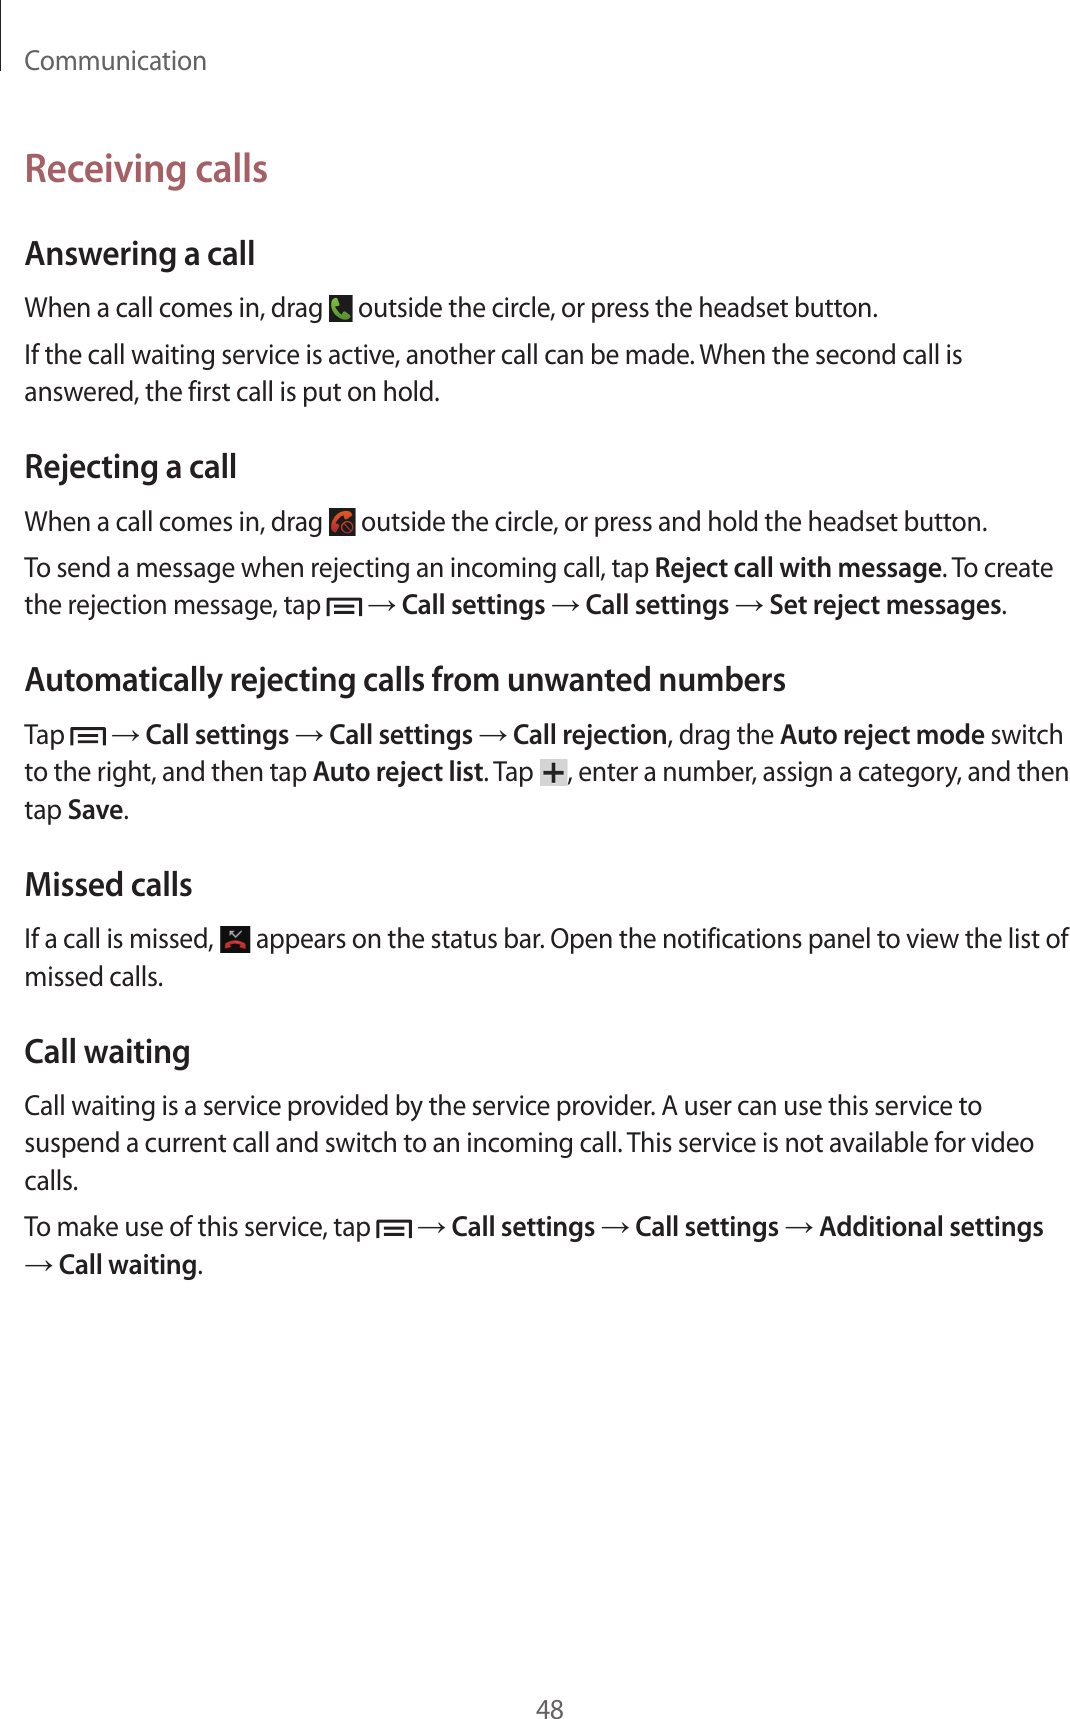 Communication48Receiving callsAnswering a callWhen a call comes in, drag   outside the circle, or press the headset button.If the call waiting service is active, another call can be made. When the second call is answered, the first call is put on hold.Rejecting a callWhen a call comes in, drag   outside the circle, or press and hold the headset button.To send a message when rejecting an incoming call, tap Reject call with message. To create the rejection message, tap   → Call settings → Call settings → Set reject messages.Automatically rejecting calls from unwanted numbersTap   → Call settings → Call settings → Call rejection, drag the Auto reject mode switch to the right, and then tap Auto reject list. Tap  , enter a number, assign a category, and then tap Save.Missed callsIf a call is missed,   appears on the status bar. Open the notifications panel to view the list of missed calls.Call waitingCall waiting is a service provided by the service provider. A user can use this service to suspend a current call and switch to an incoming call. This service is not available for video calls.To make use of this service, tap   → Call settings → Call settings → Additional settings → Call waiting.